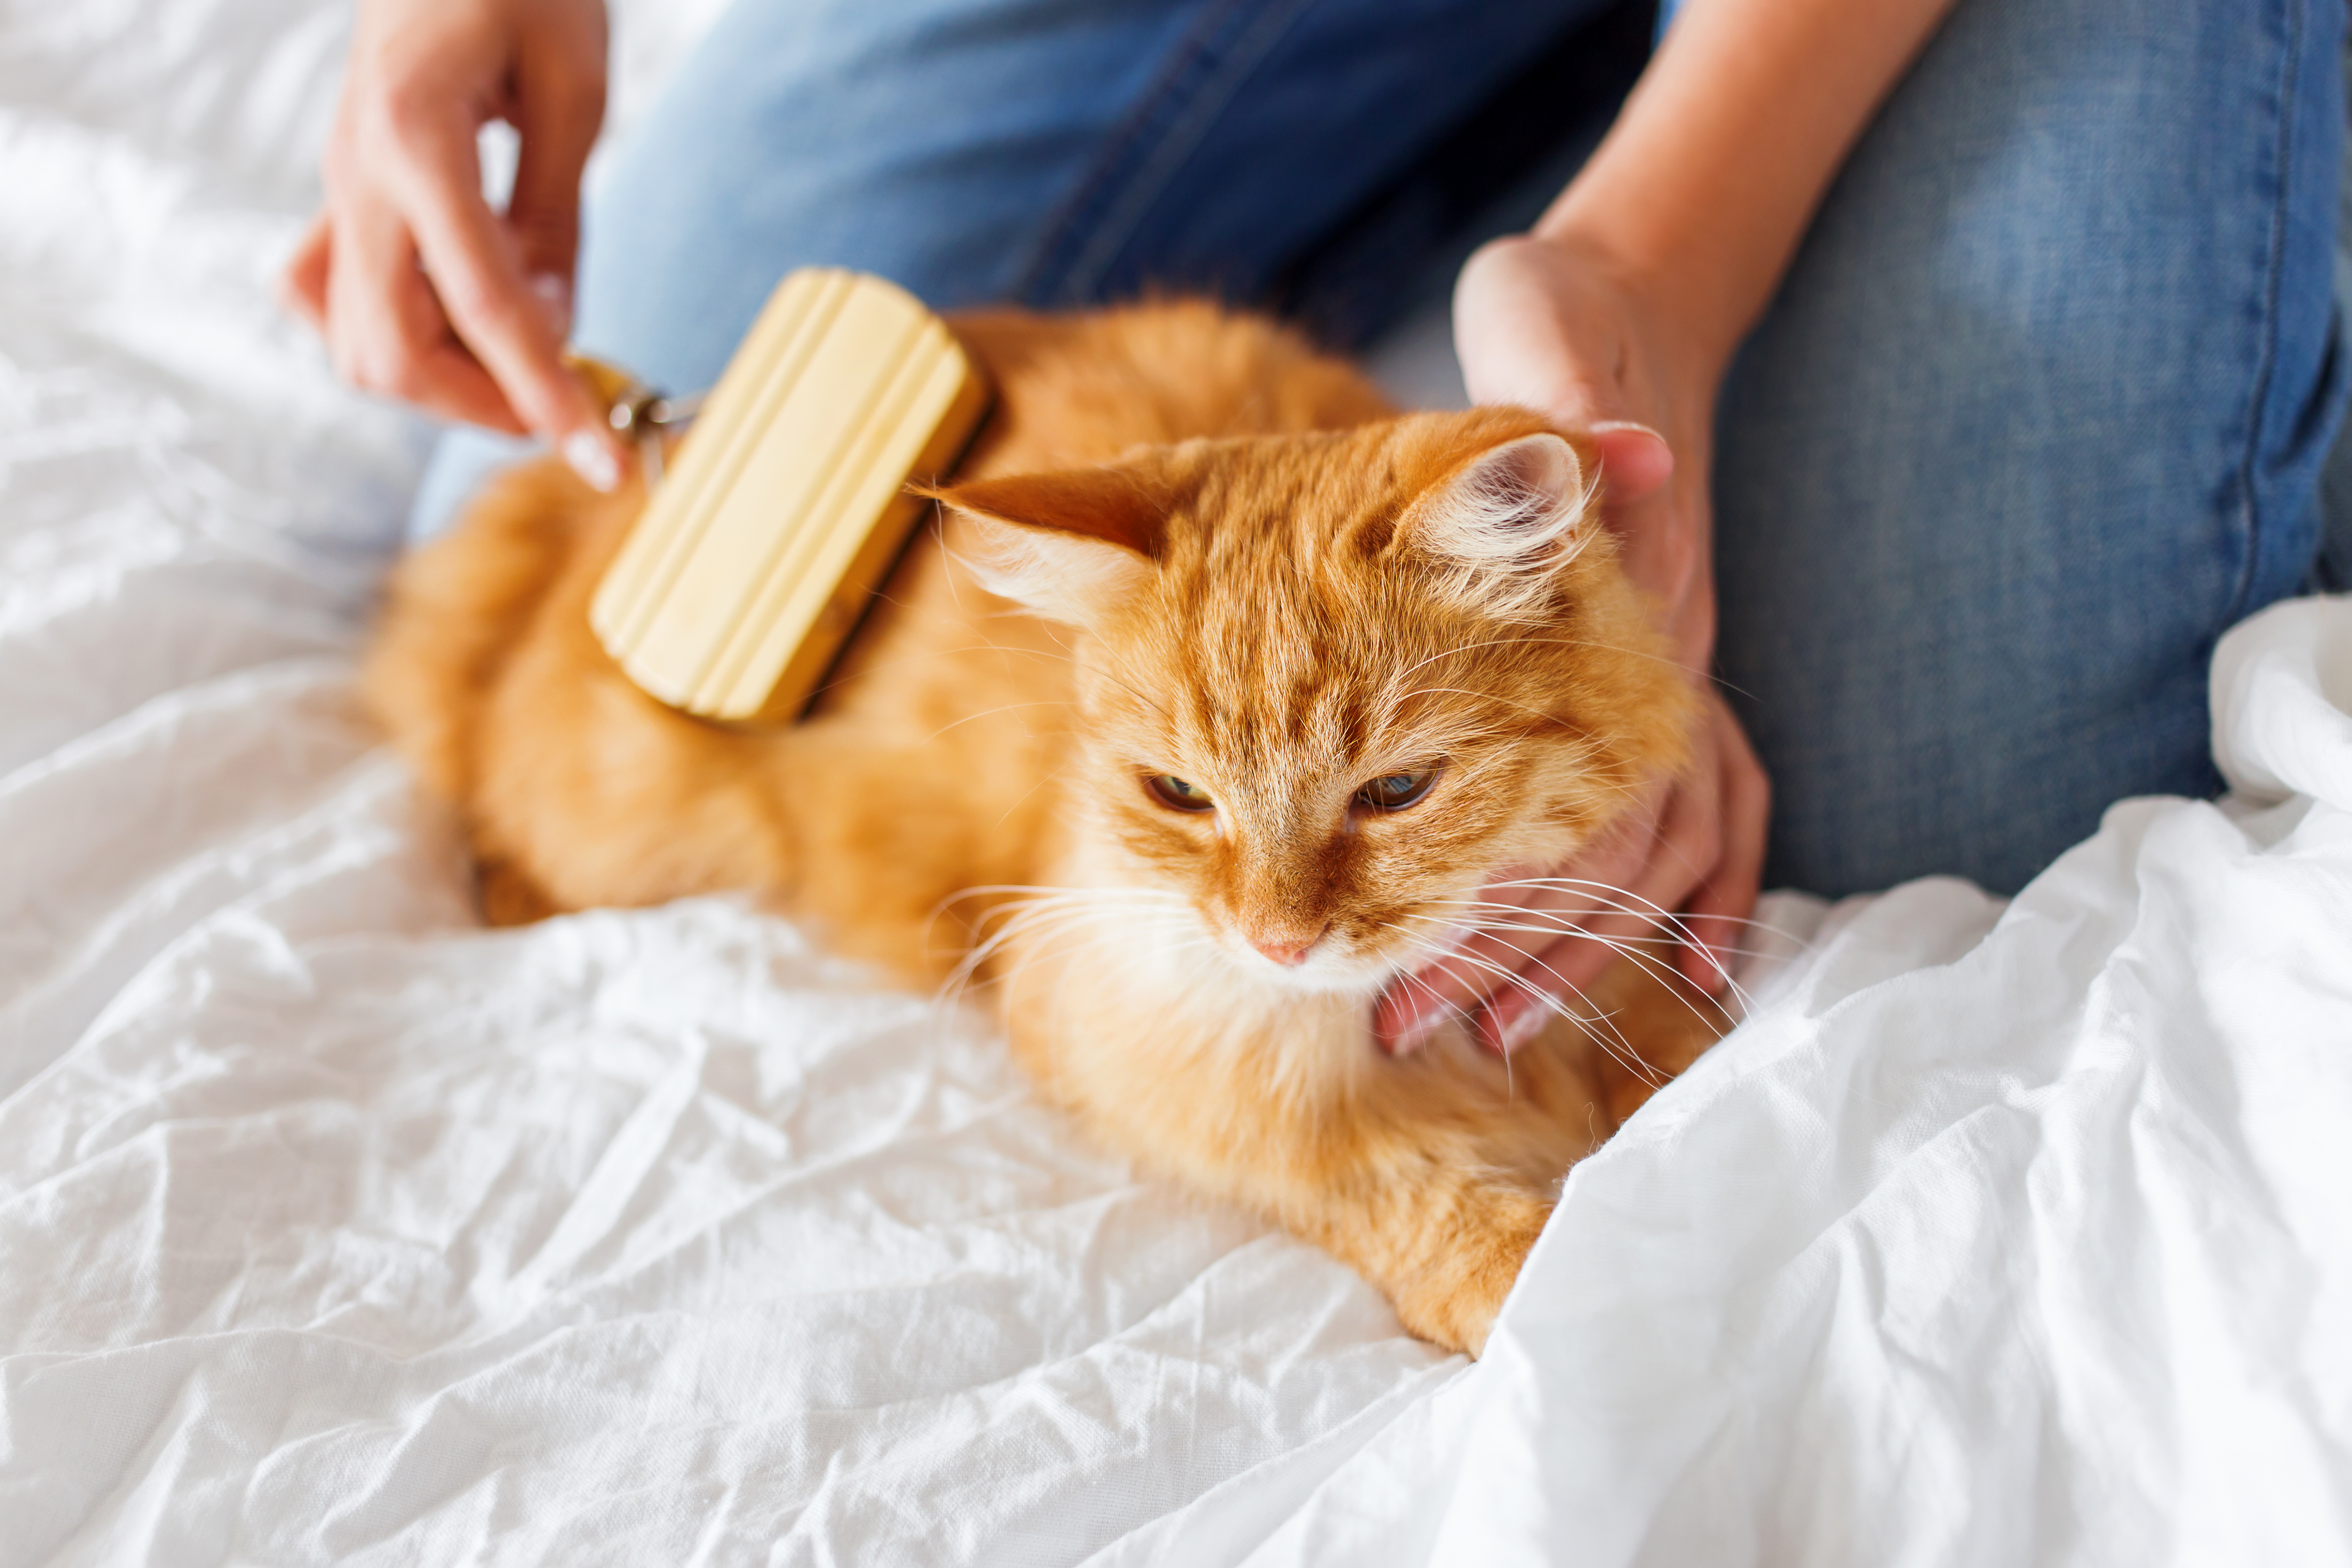 An orange cat enjoys getting brushed by his owner